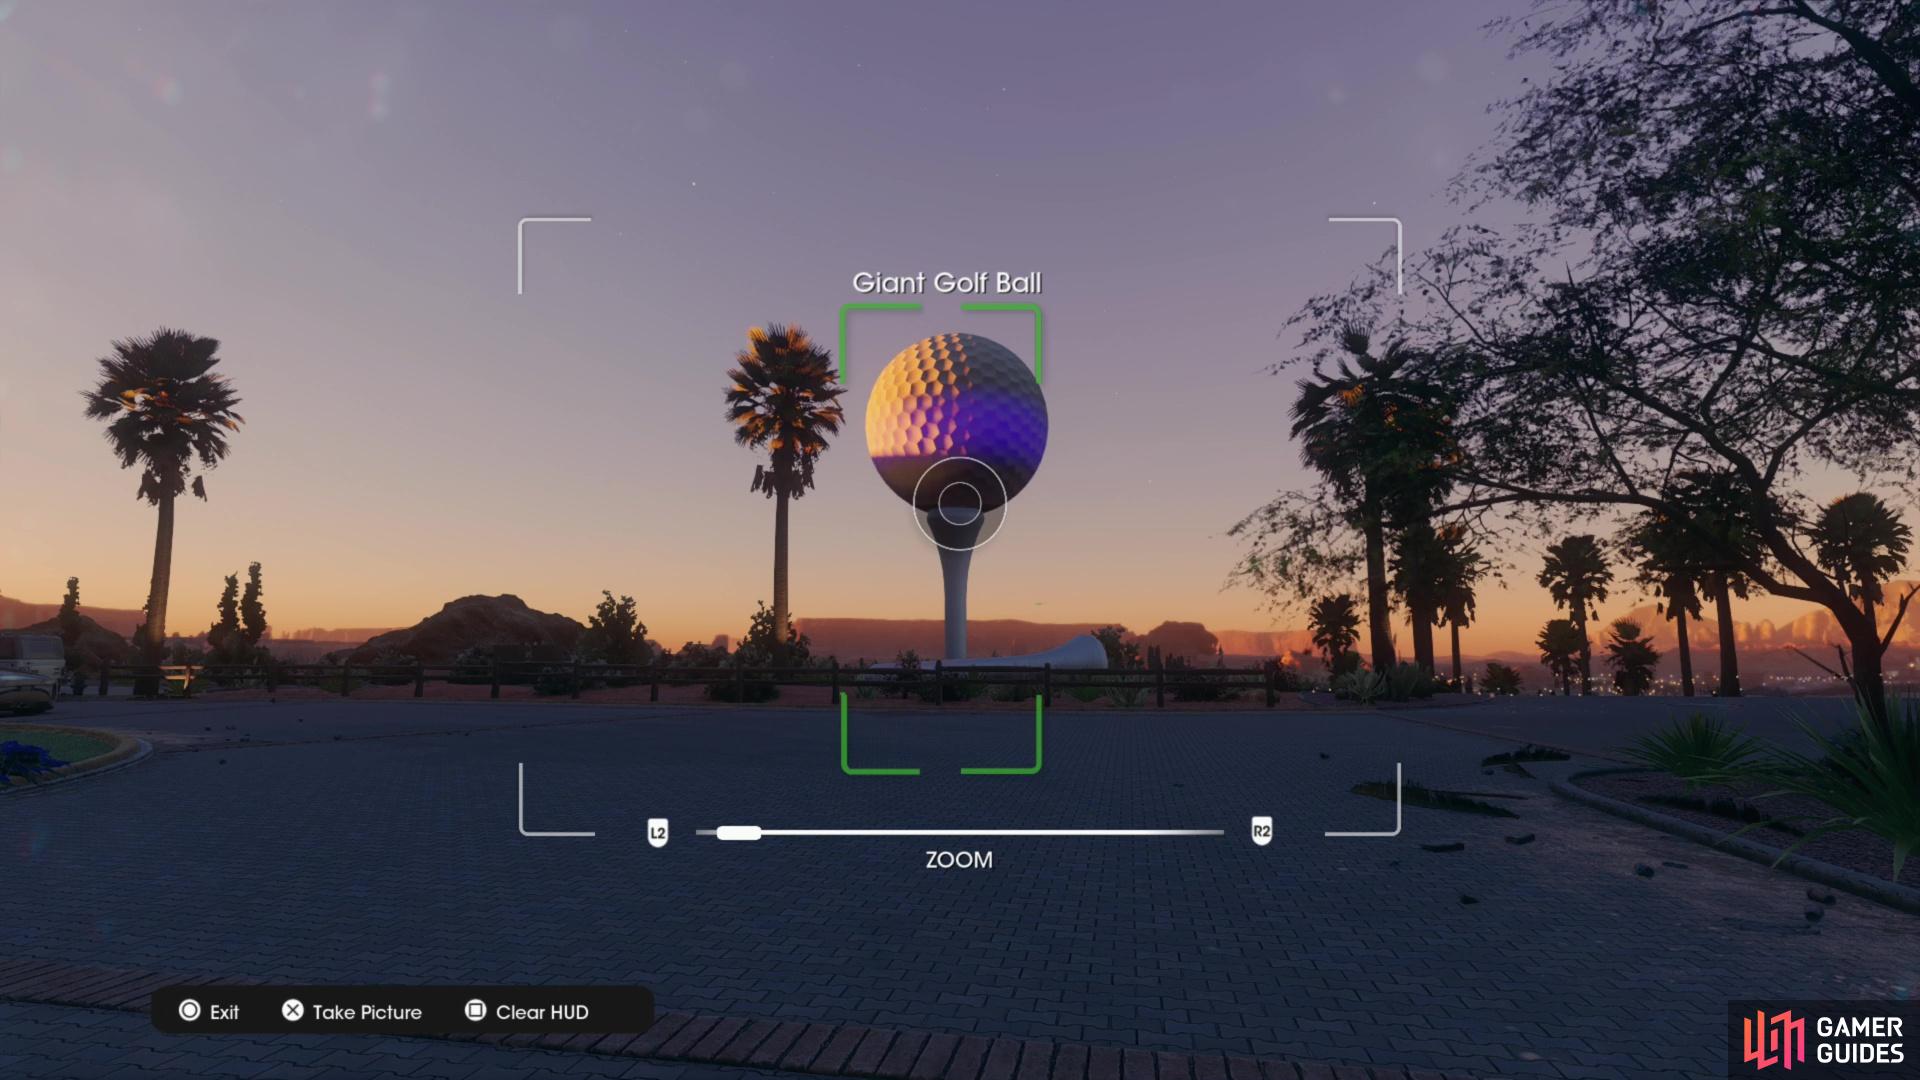 Take a picture of the Giant Golf Ball collectible to obtain it.